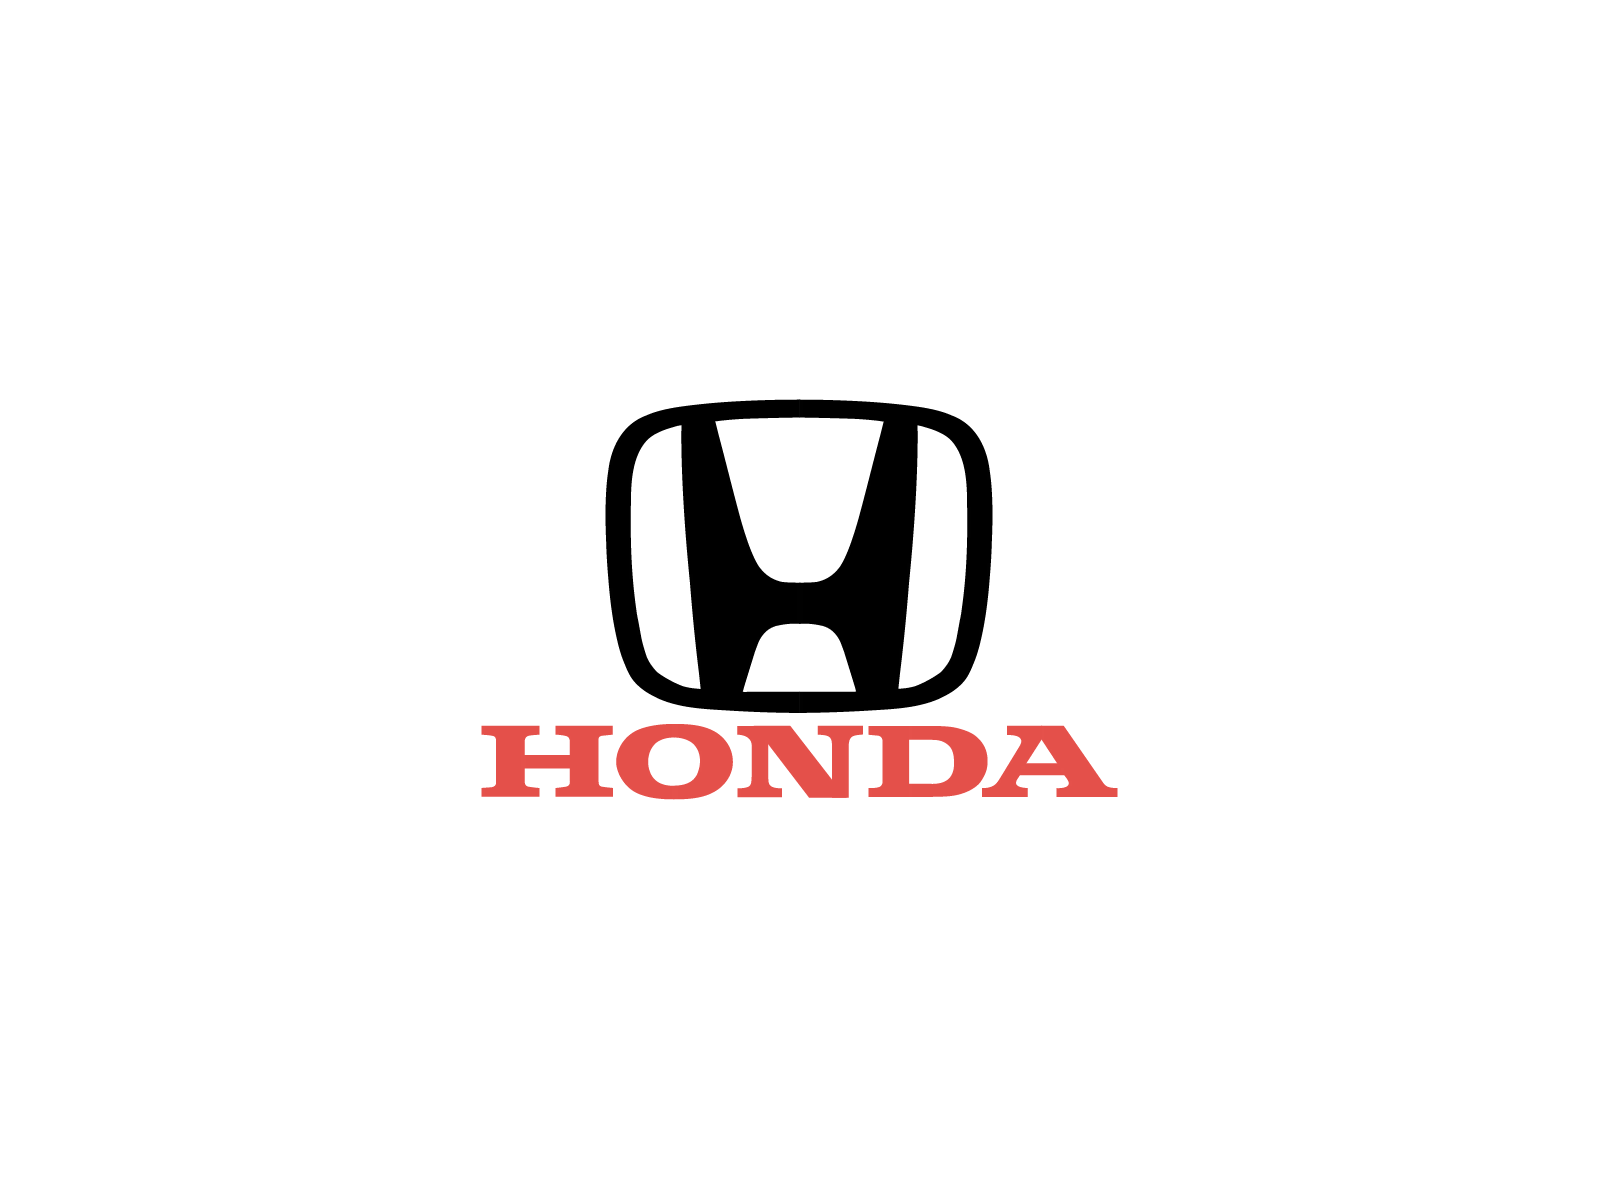 Top 99 pictures of honda logo most viewed and downloaded - Wikipedia